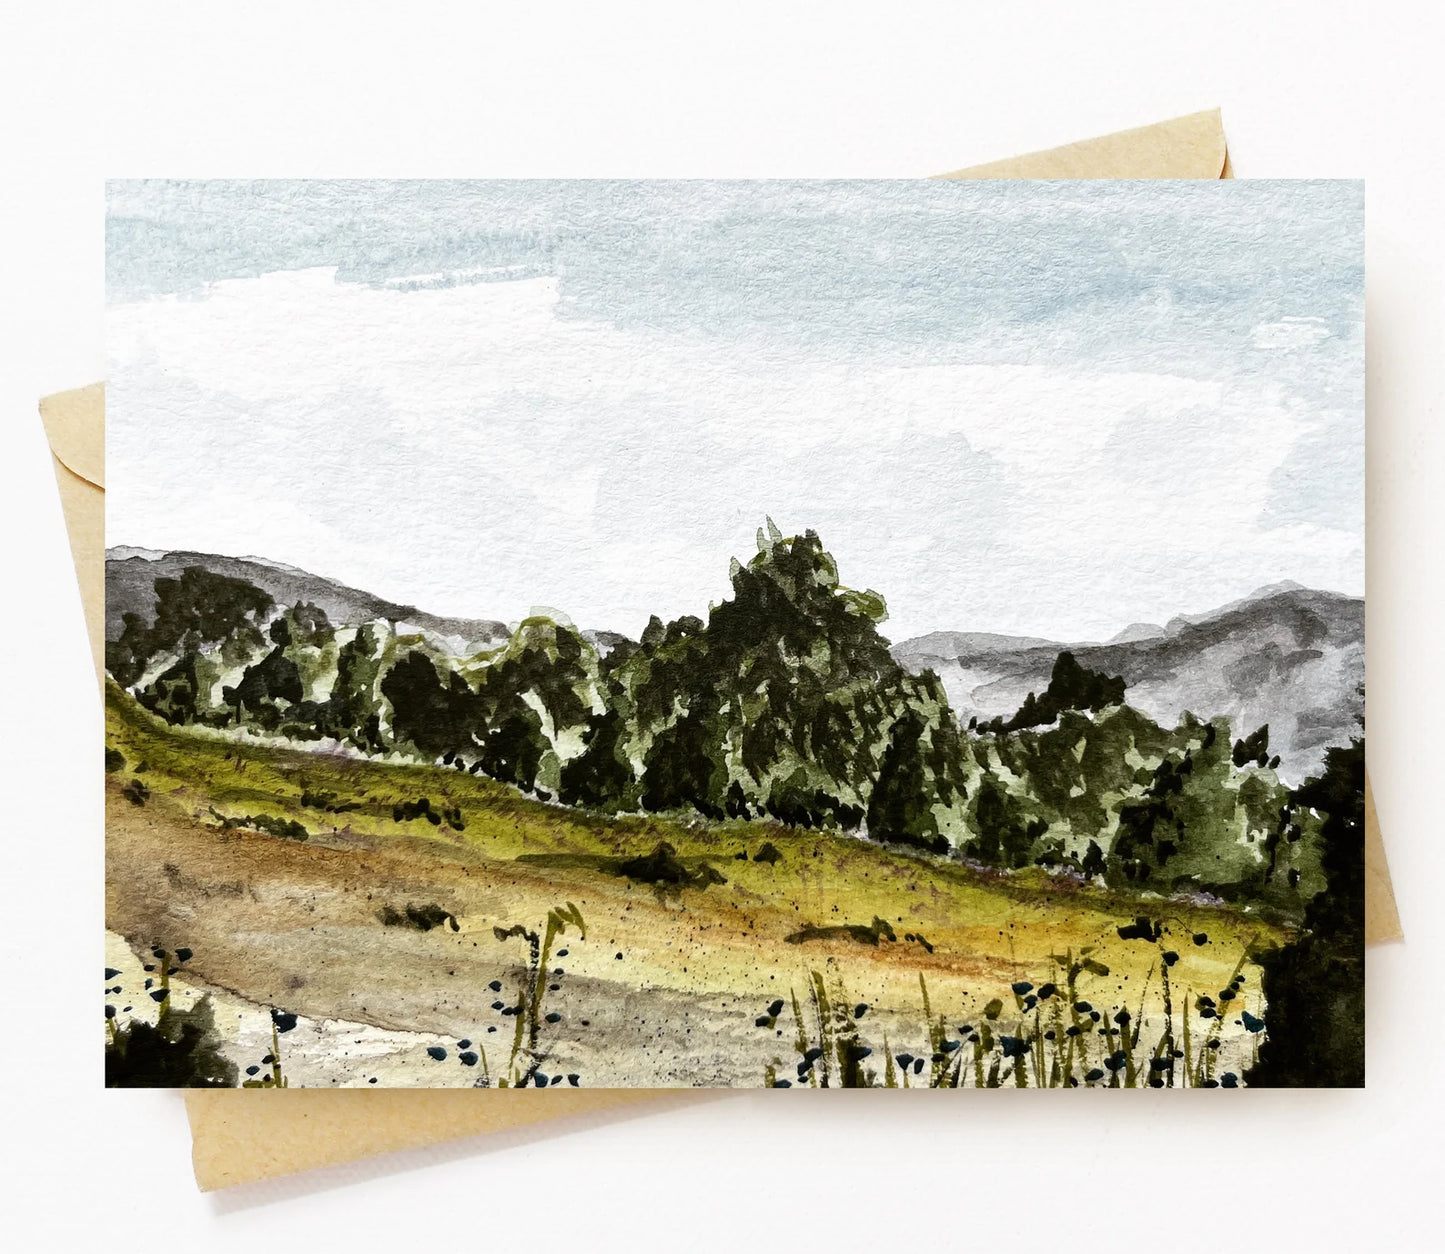 BellavanceInk: Greeting Card With Watercolor Of Fields And Meadows In The Blue Ridge Mountains 5 x 7 Inches - BellavanceInk